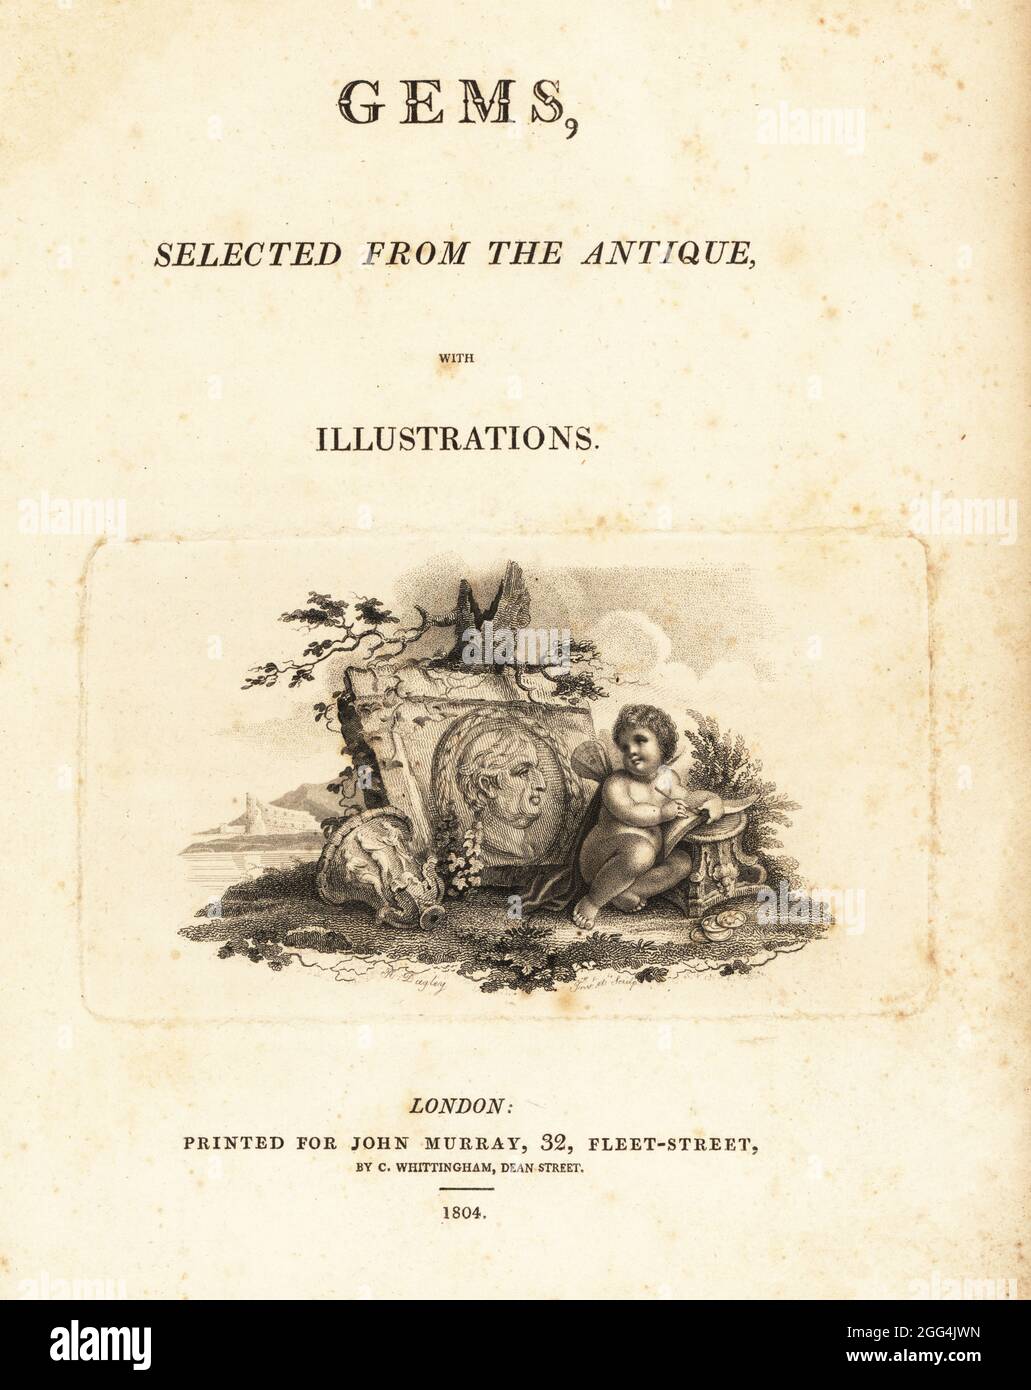 Title page with calligraphy and vignette of winged Cupid writing in a book. Near antique ruins with vase, plinth, coins, and bust with wreath. Copperplate engraving drawn and engraved by Richard Dagley from Gems, Selected from the Antique, with Illustrations, John Murray, London, 1804. Stock Photo